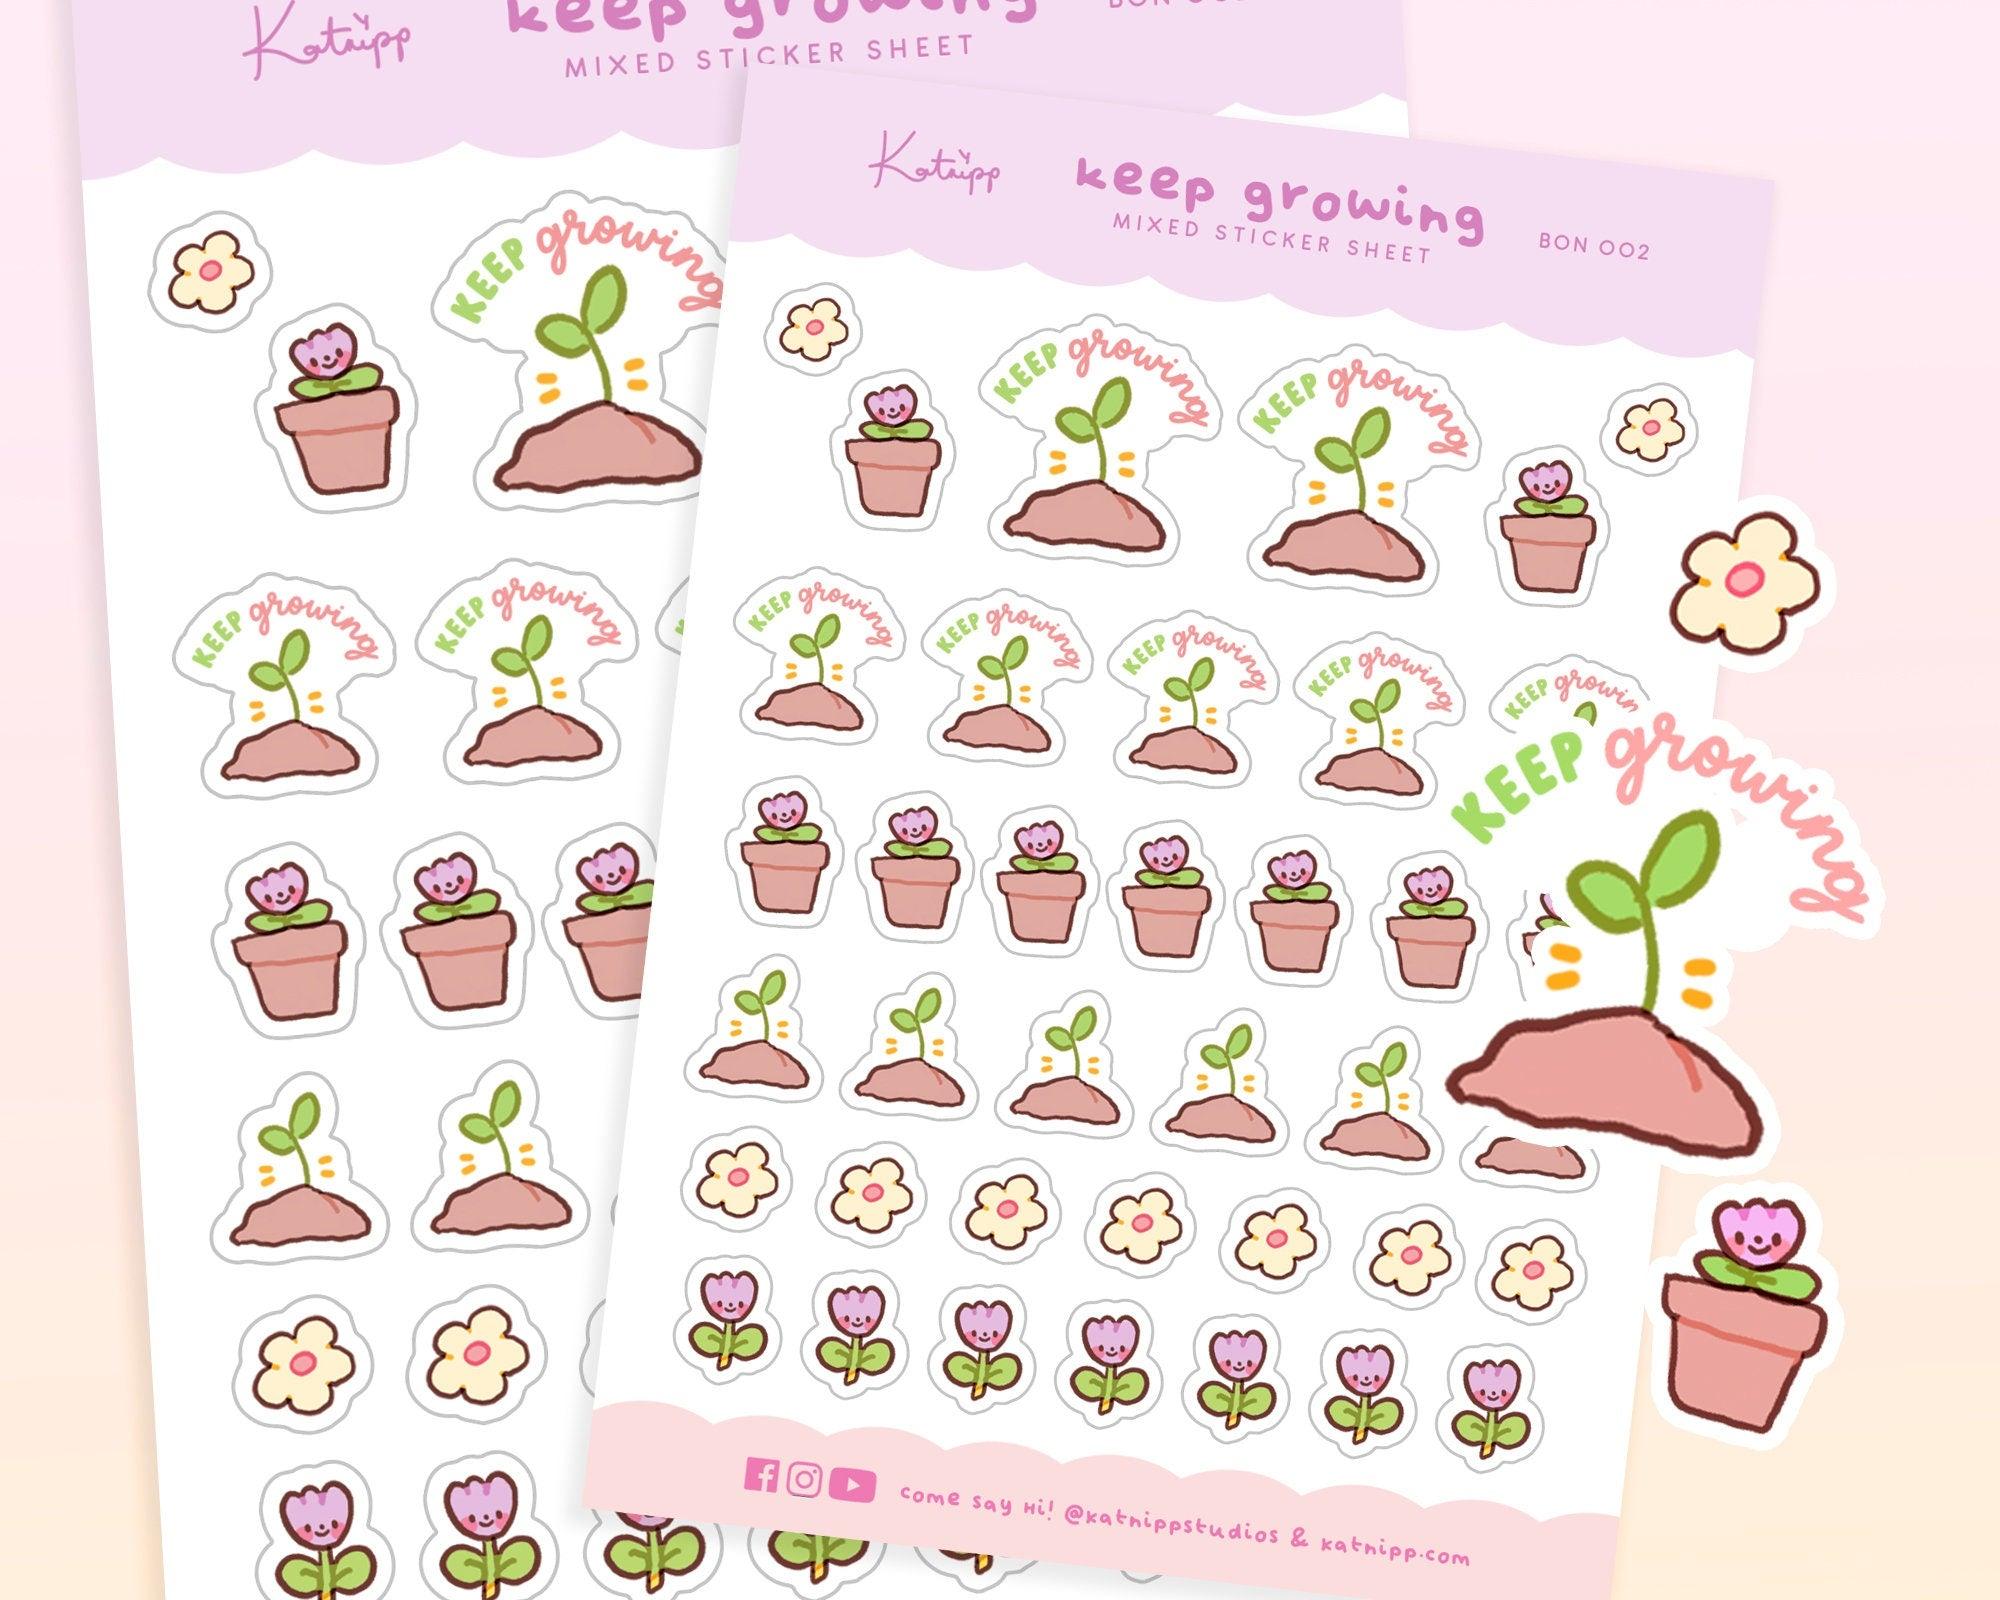 Bonbun's Spring Plants Sticker Sheet - A6 size. Adorable and motivational stickers for planners and journals, featuring original illustrations.